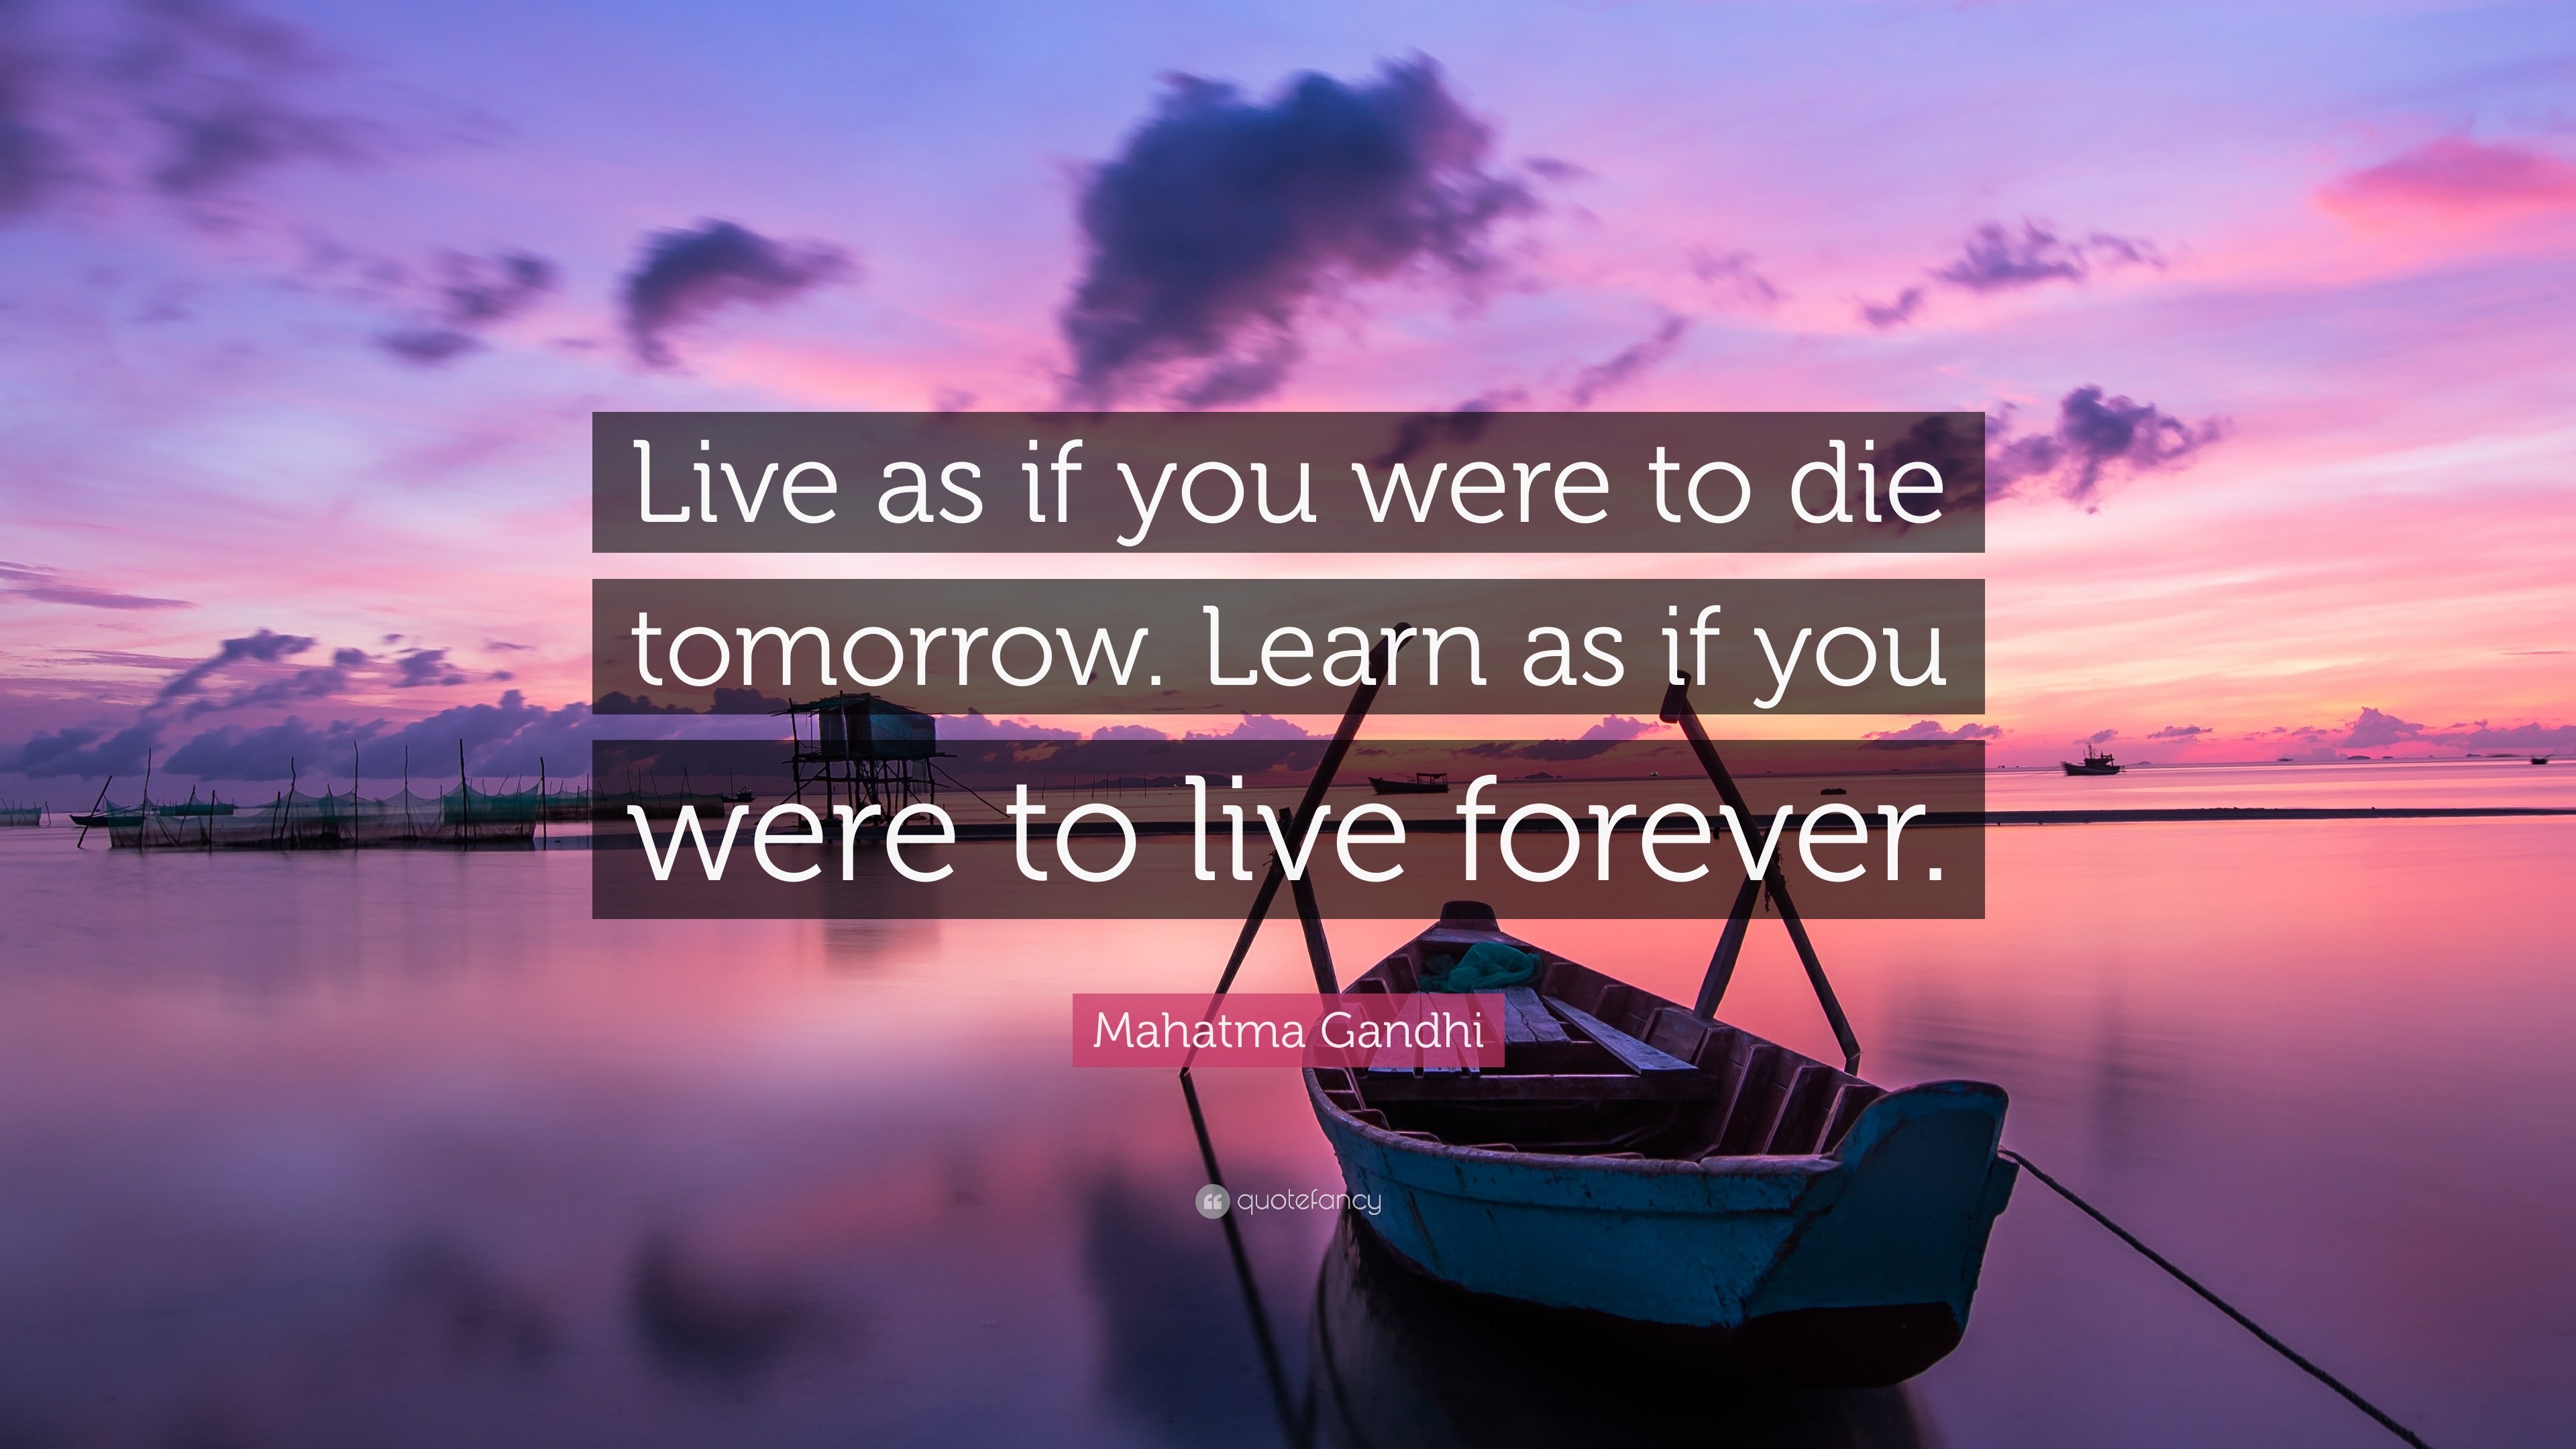 Mahatma Gandhi Quote Live As If You Were To Die Tomorrow Learn As If You Were To Live Forever 26 Wallpapers Quotefancy